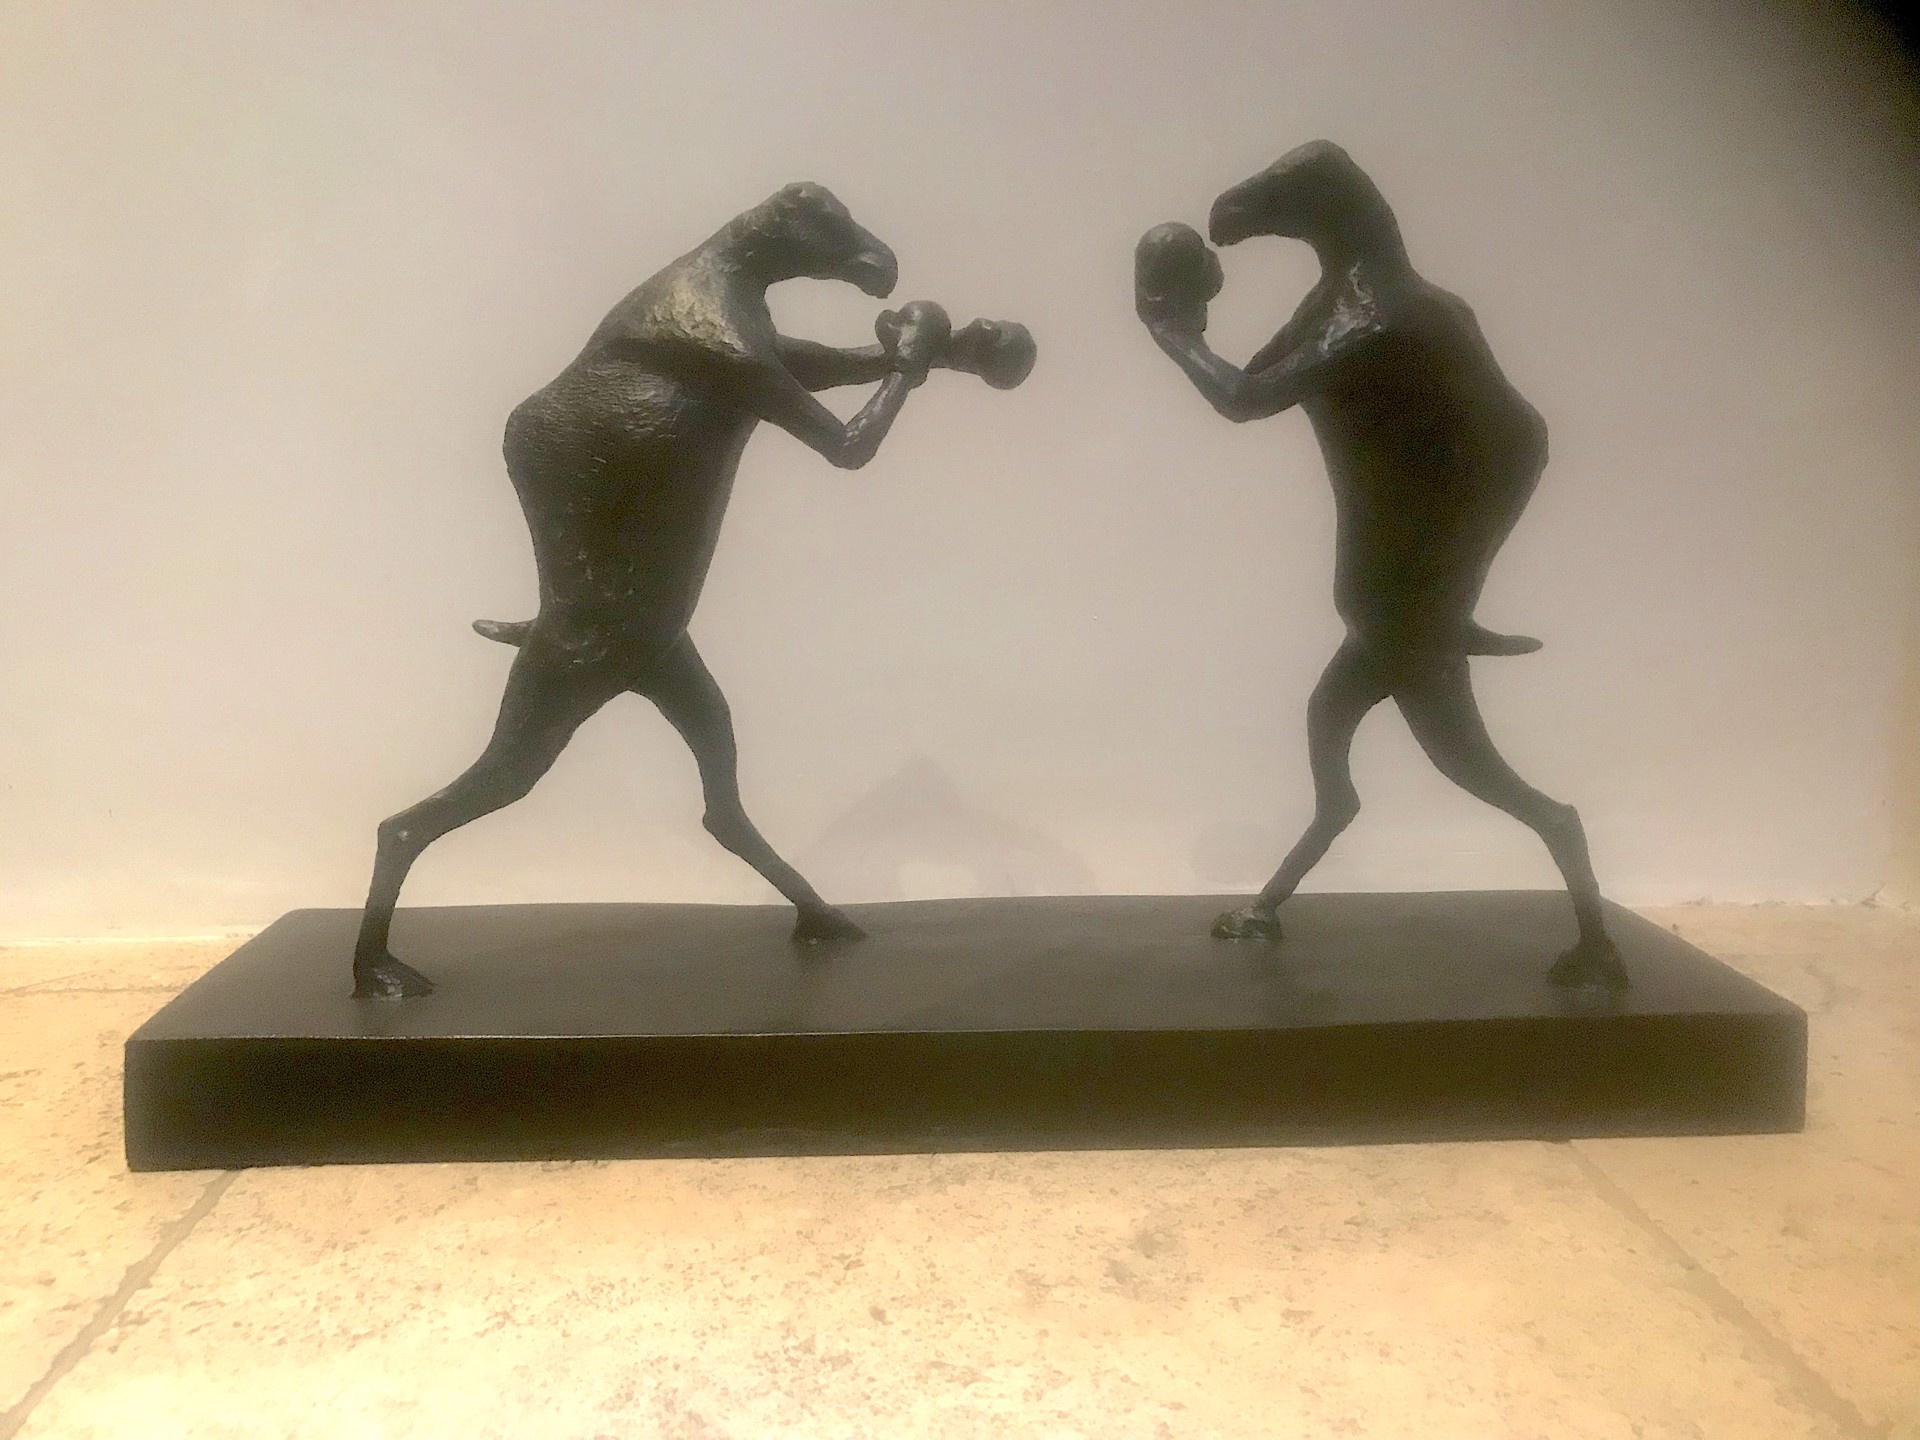 Boxing Camels by Thomas Ostenberg